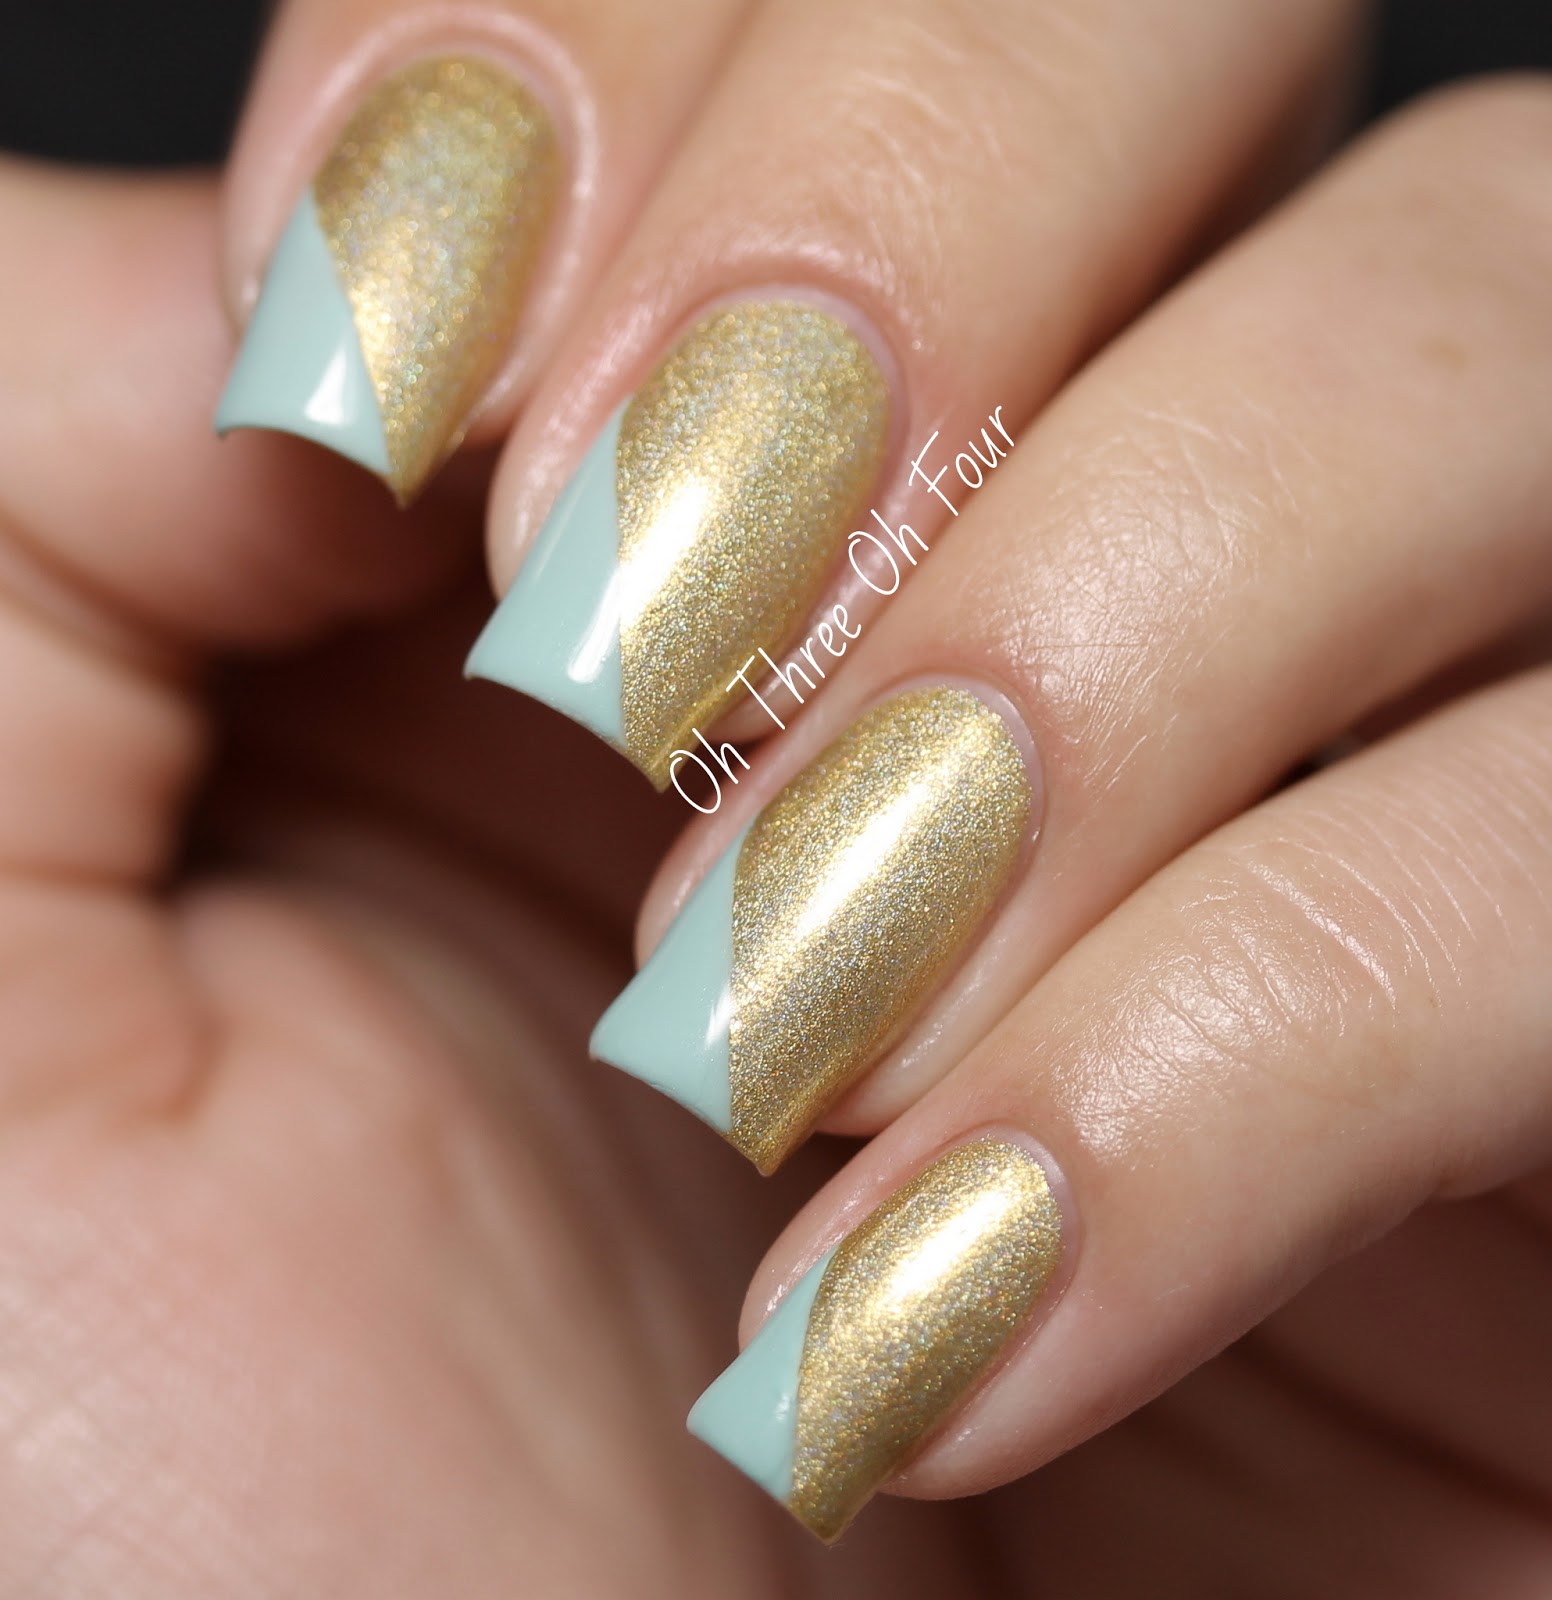 KBShimmer Early Summer 2014 Collection Nail Art